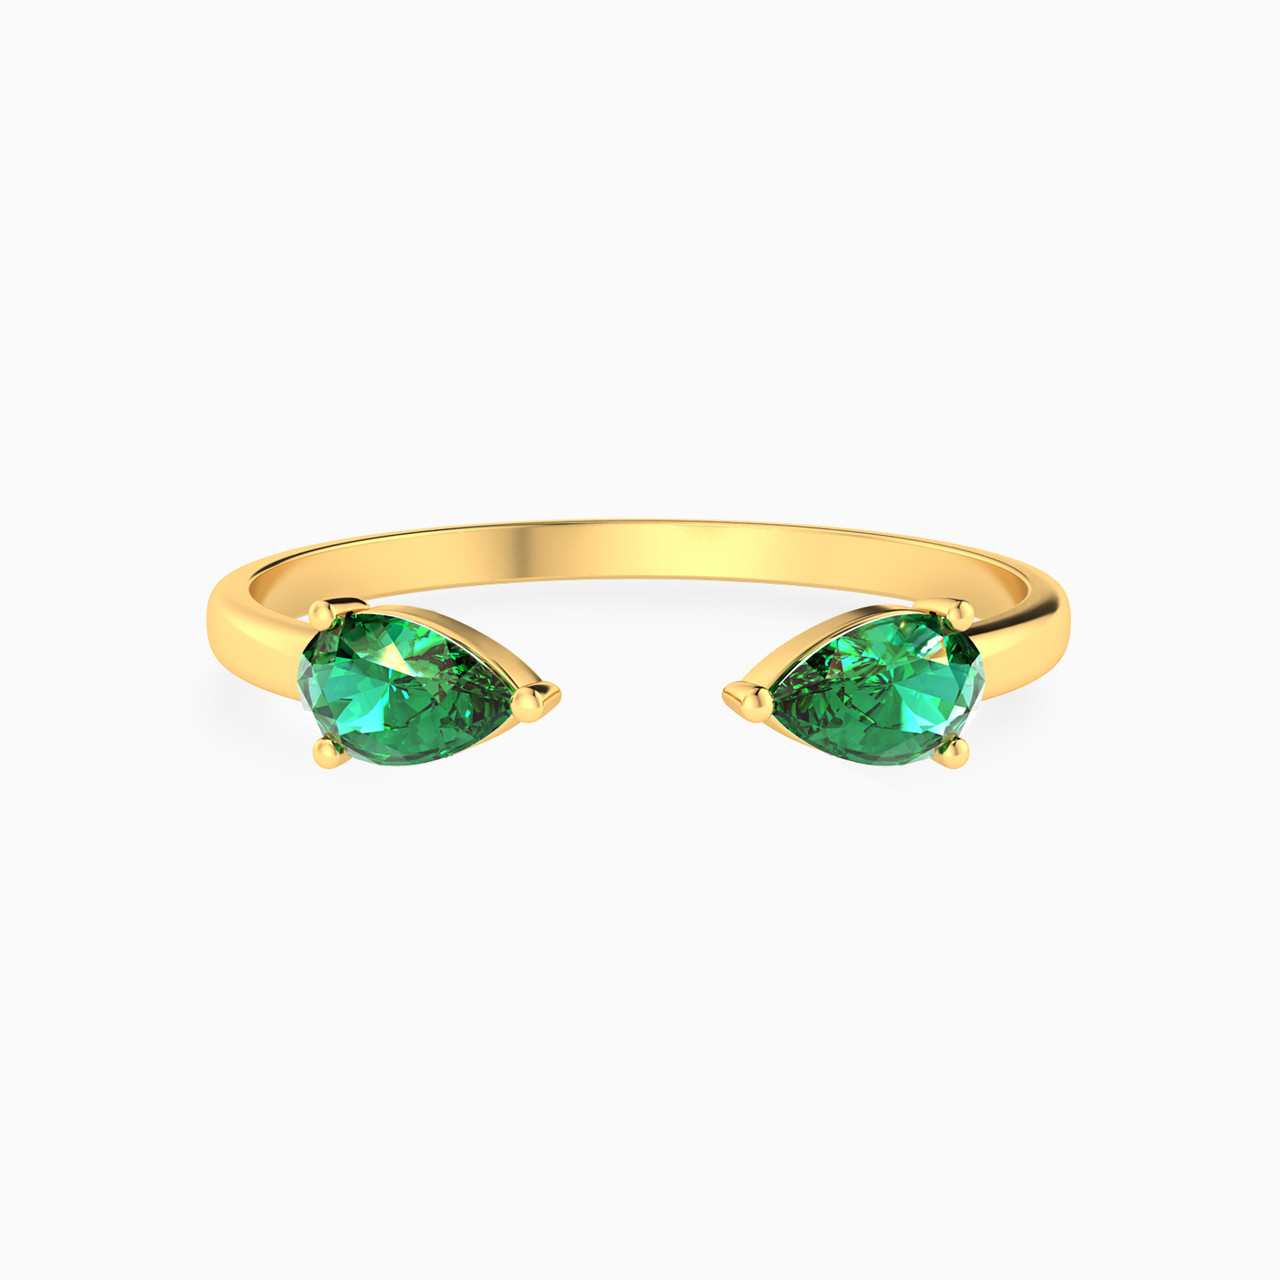 Teardrop Shaped Colored Stones Two-Headed Ring in 14K Gold